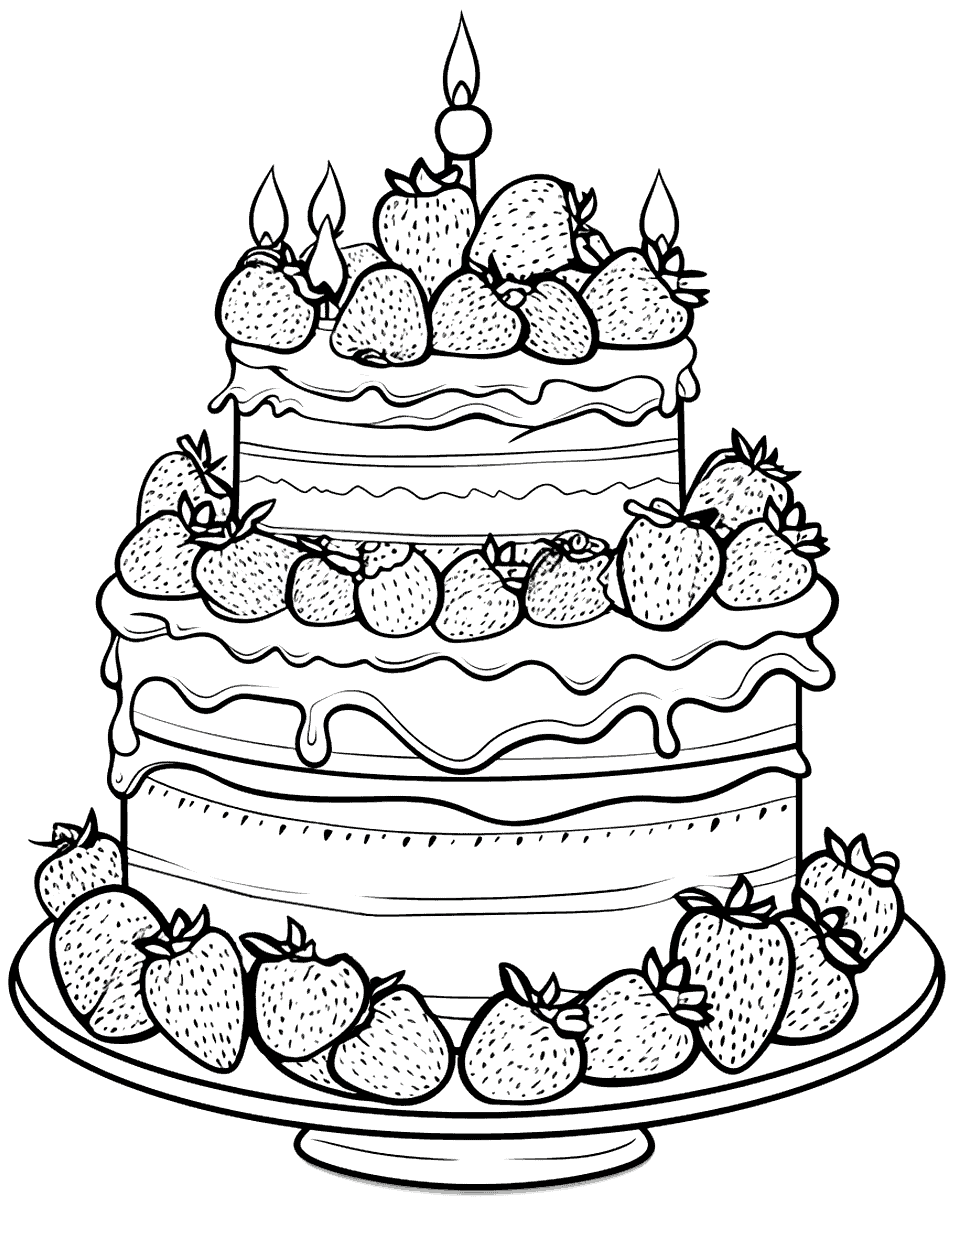 Strawberry Field Cake Coloring Page - A cake topped with fresh strawberries and whipped cream.